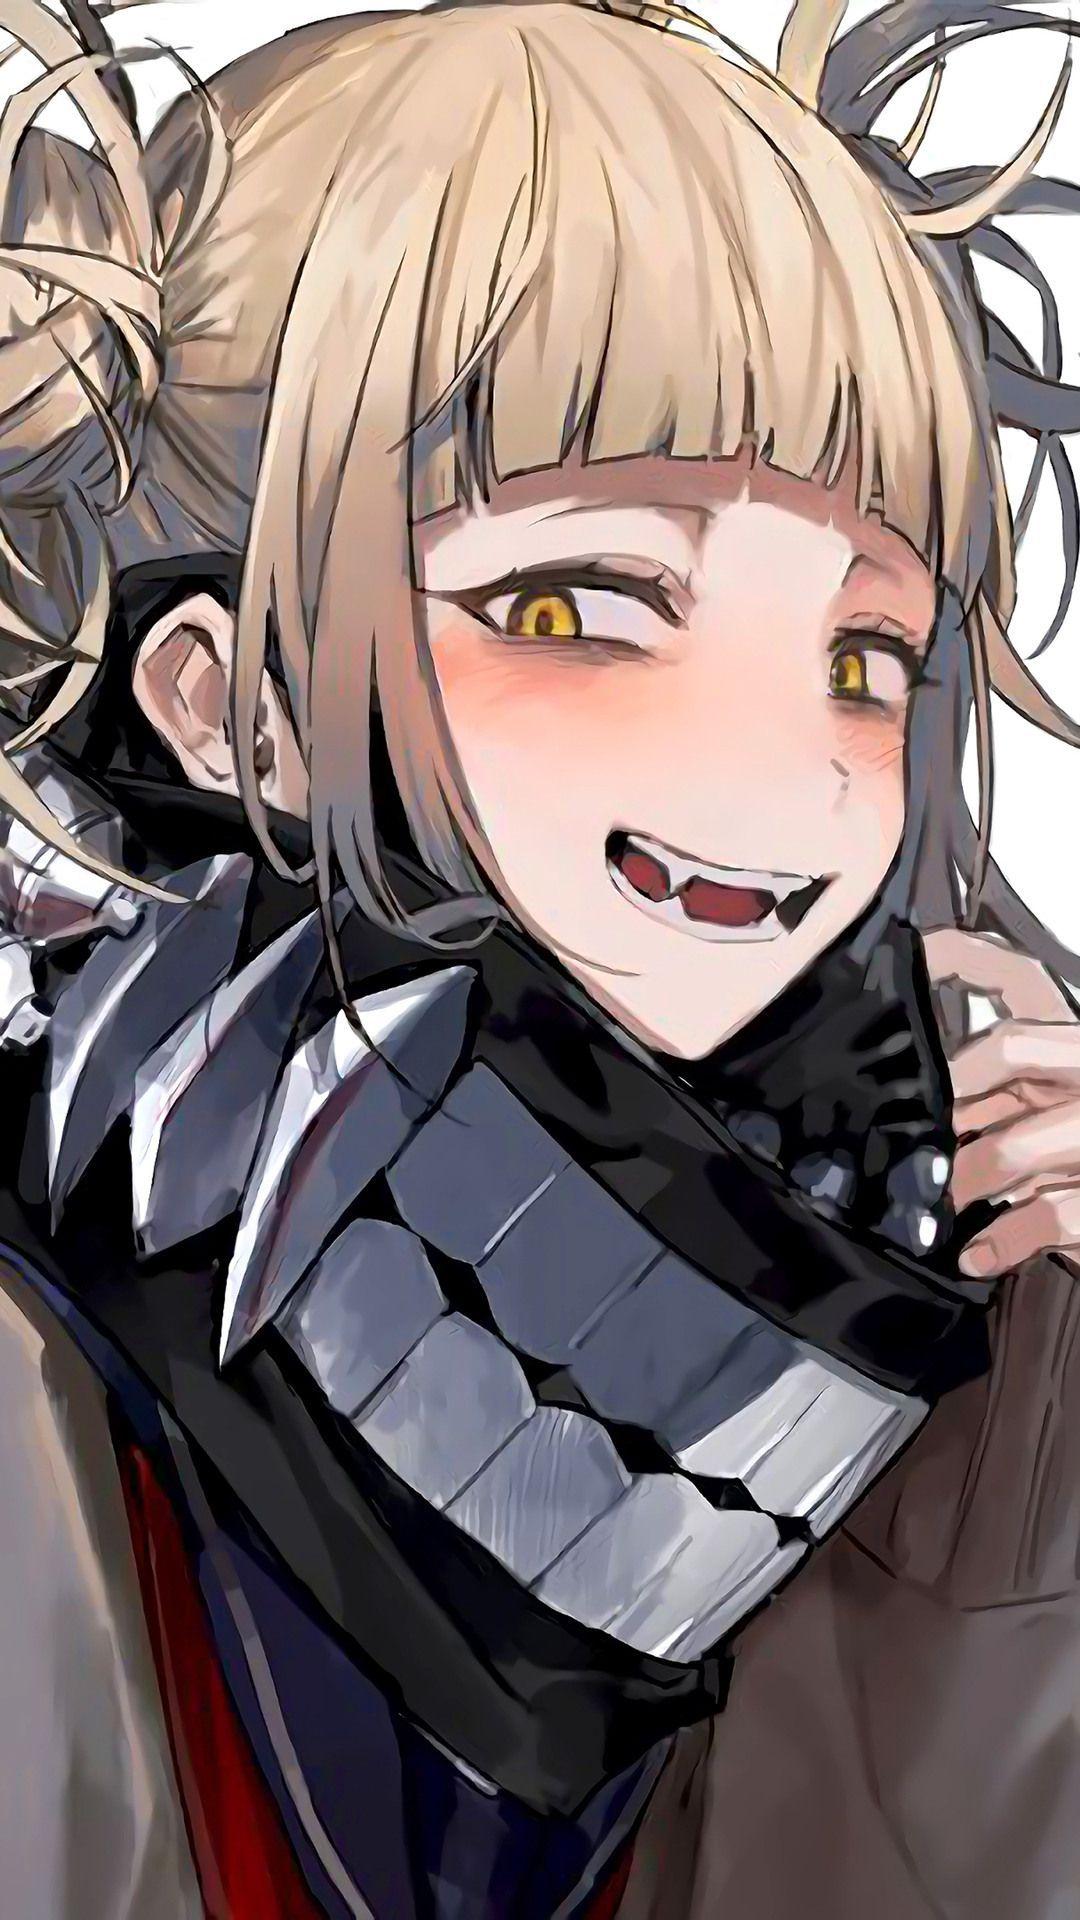 1080 x 1920 · jpeg - Scared Himiko Toga Wallpapers - Wallpaper Cave